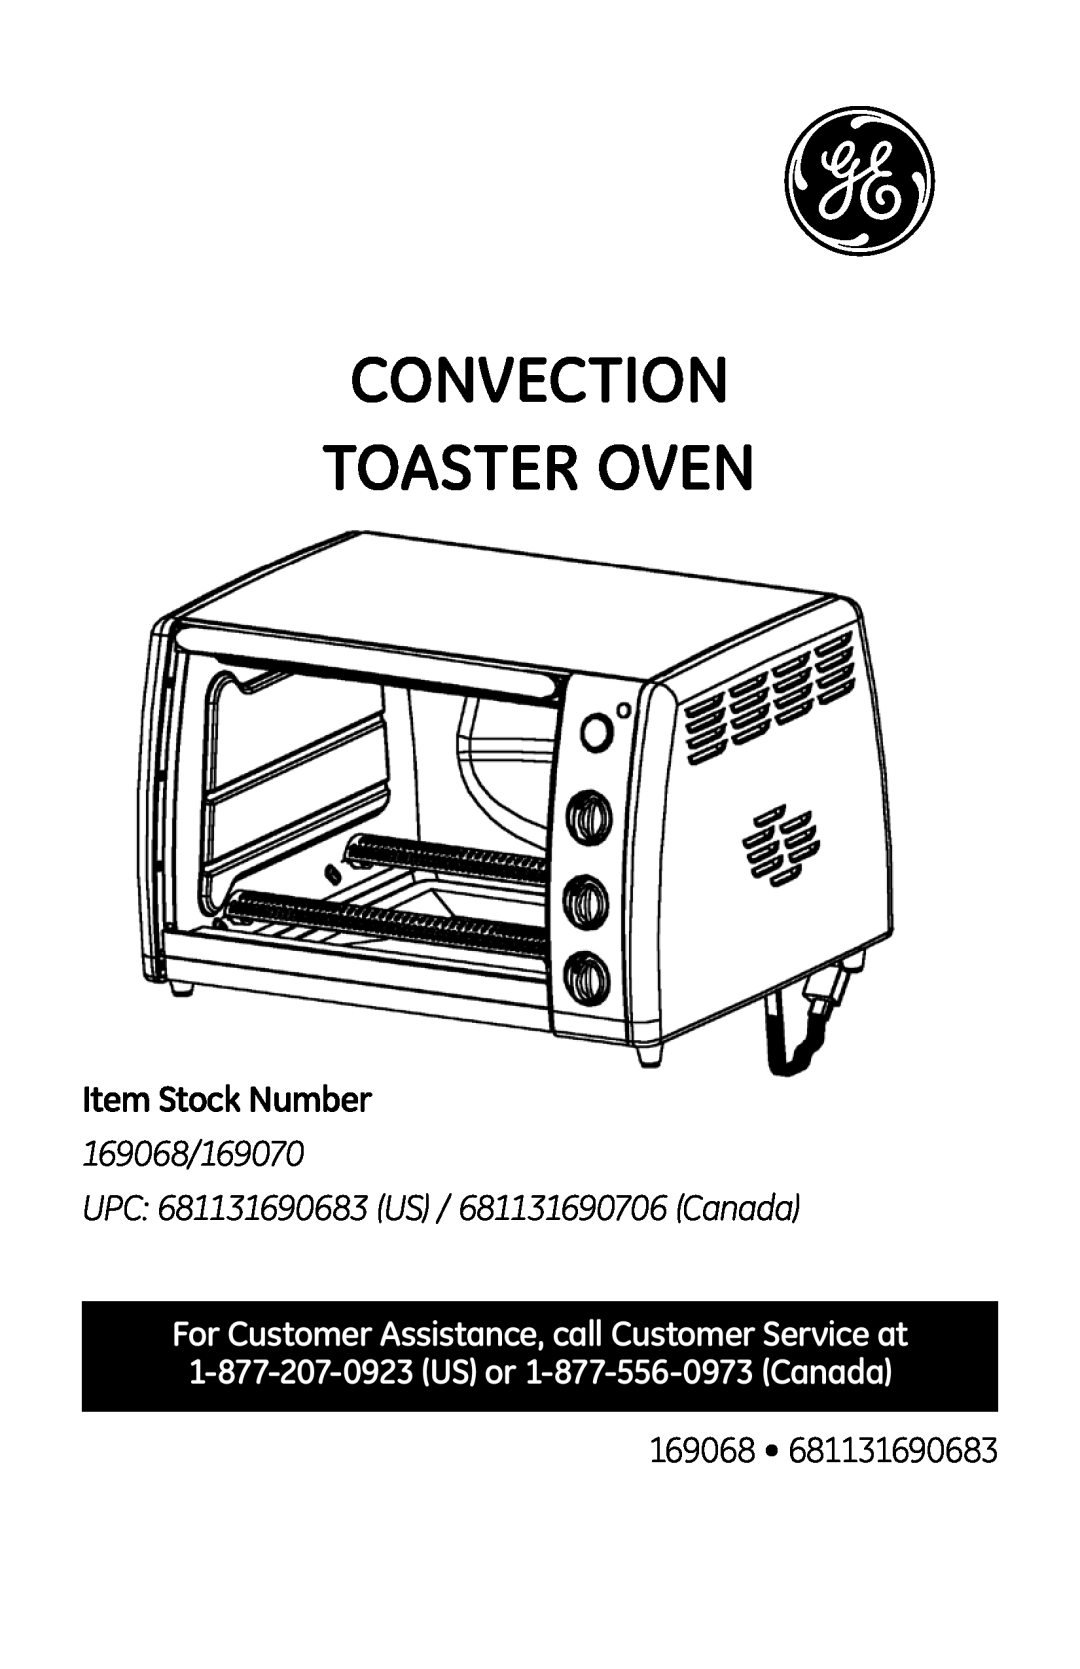 GE manual Convection Toaster Oven, Item Stock Number, 169068/169070, UPC 681131690683 US / 681131690706 Canada 